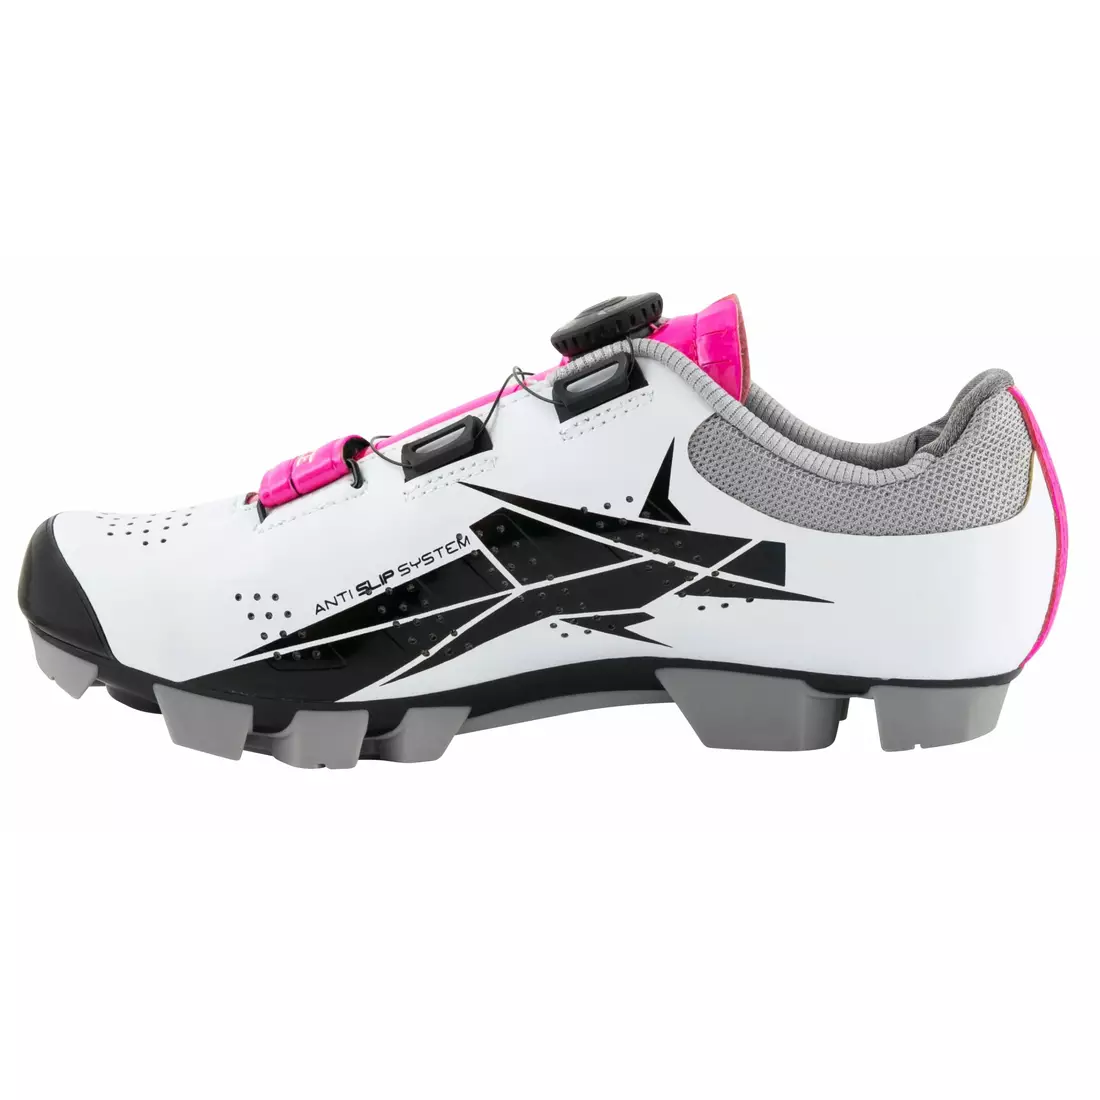 FORCE MTB CRYSTAL women bicycle shoes, white-pink 9407238